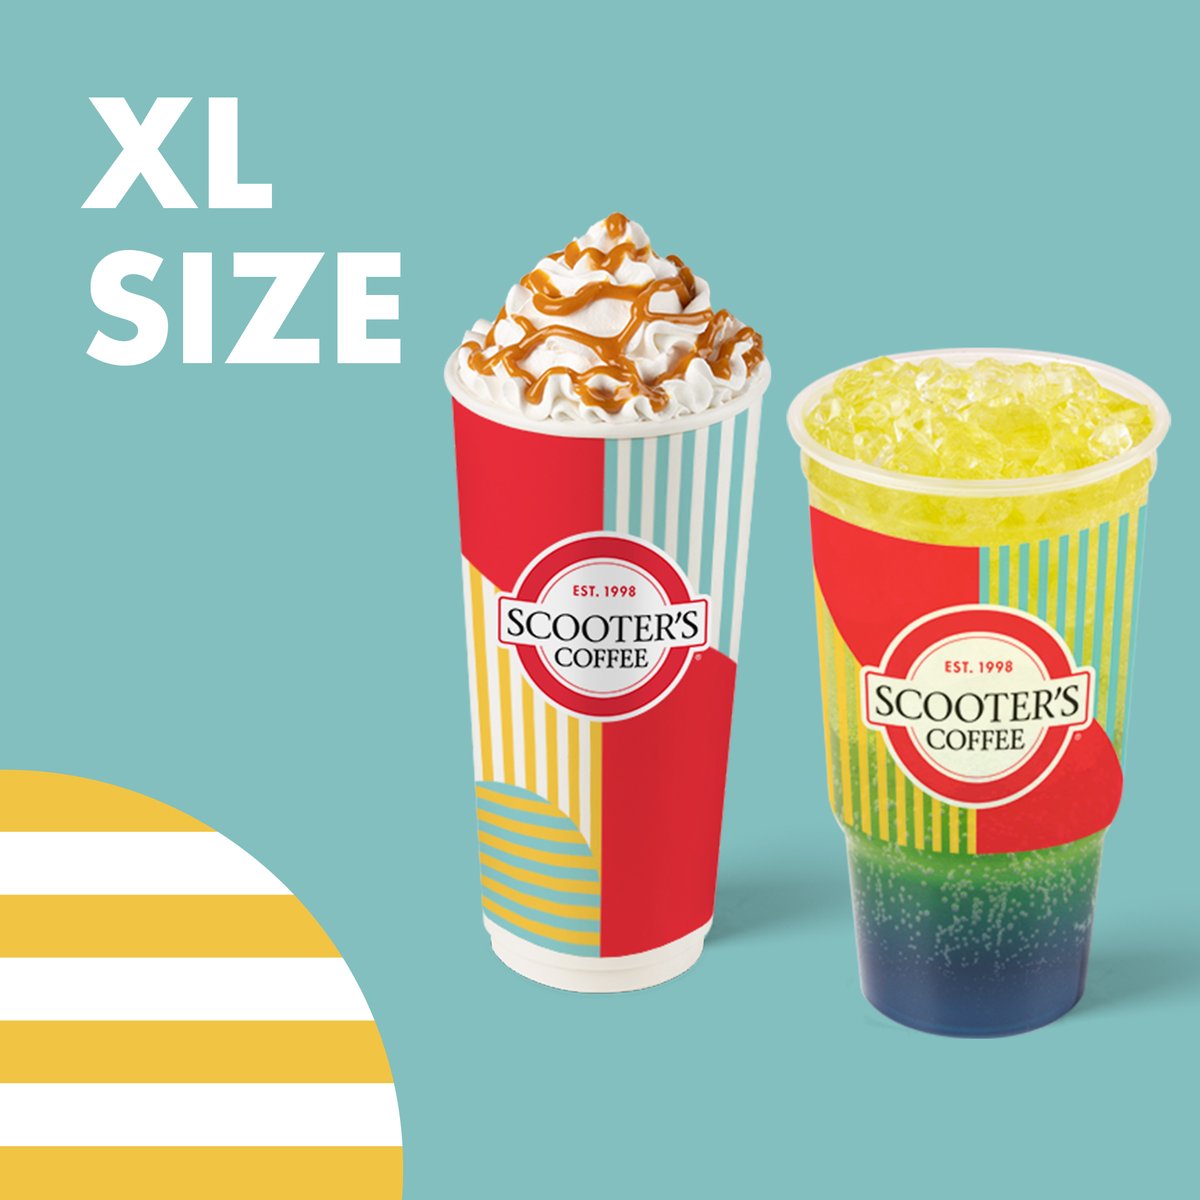 This is BIG!!! 🤩 Our NEW XL Cups, A.K.A The Super Scooter, is here! Enjoy your favorite Scooter's Coffee drinks - hot or cold - even more than ever before ❤️ #scooterscoffee #superscooter #scootonaround